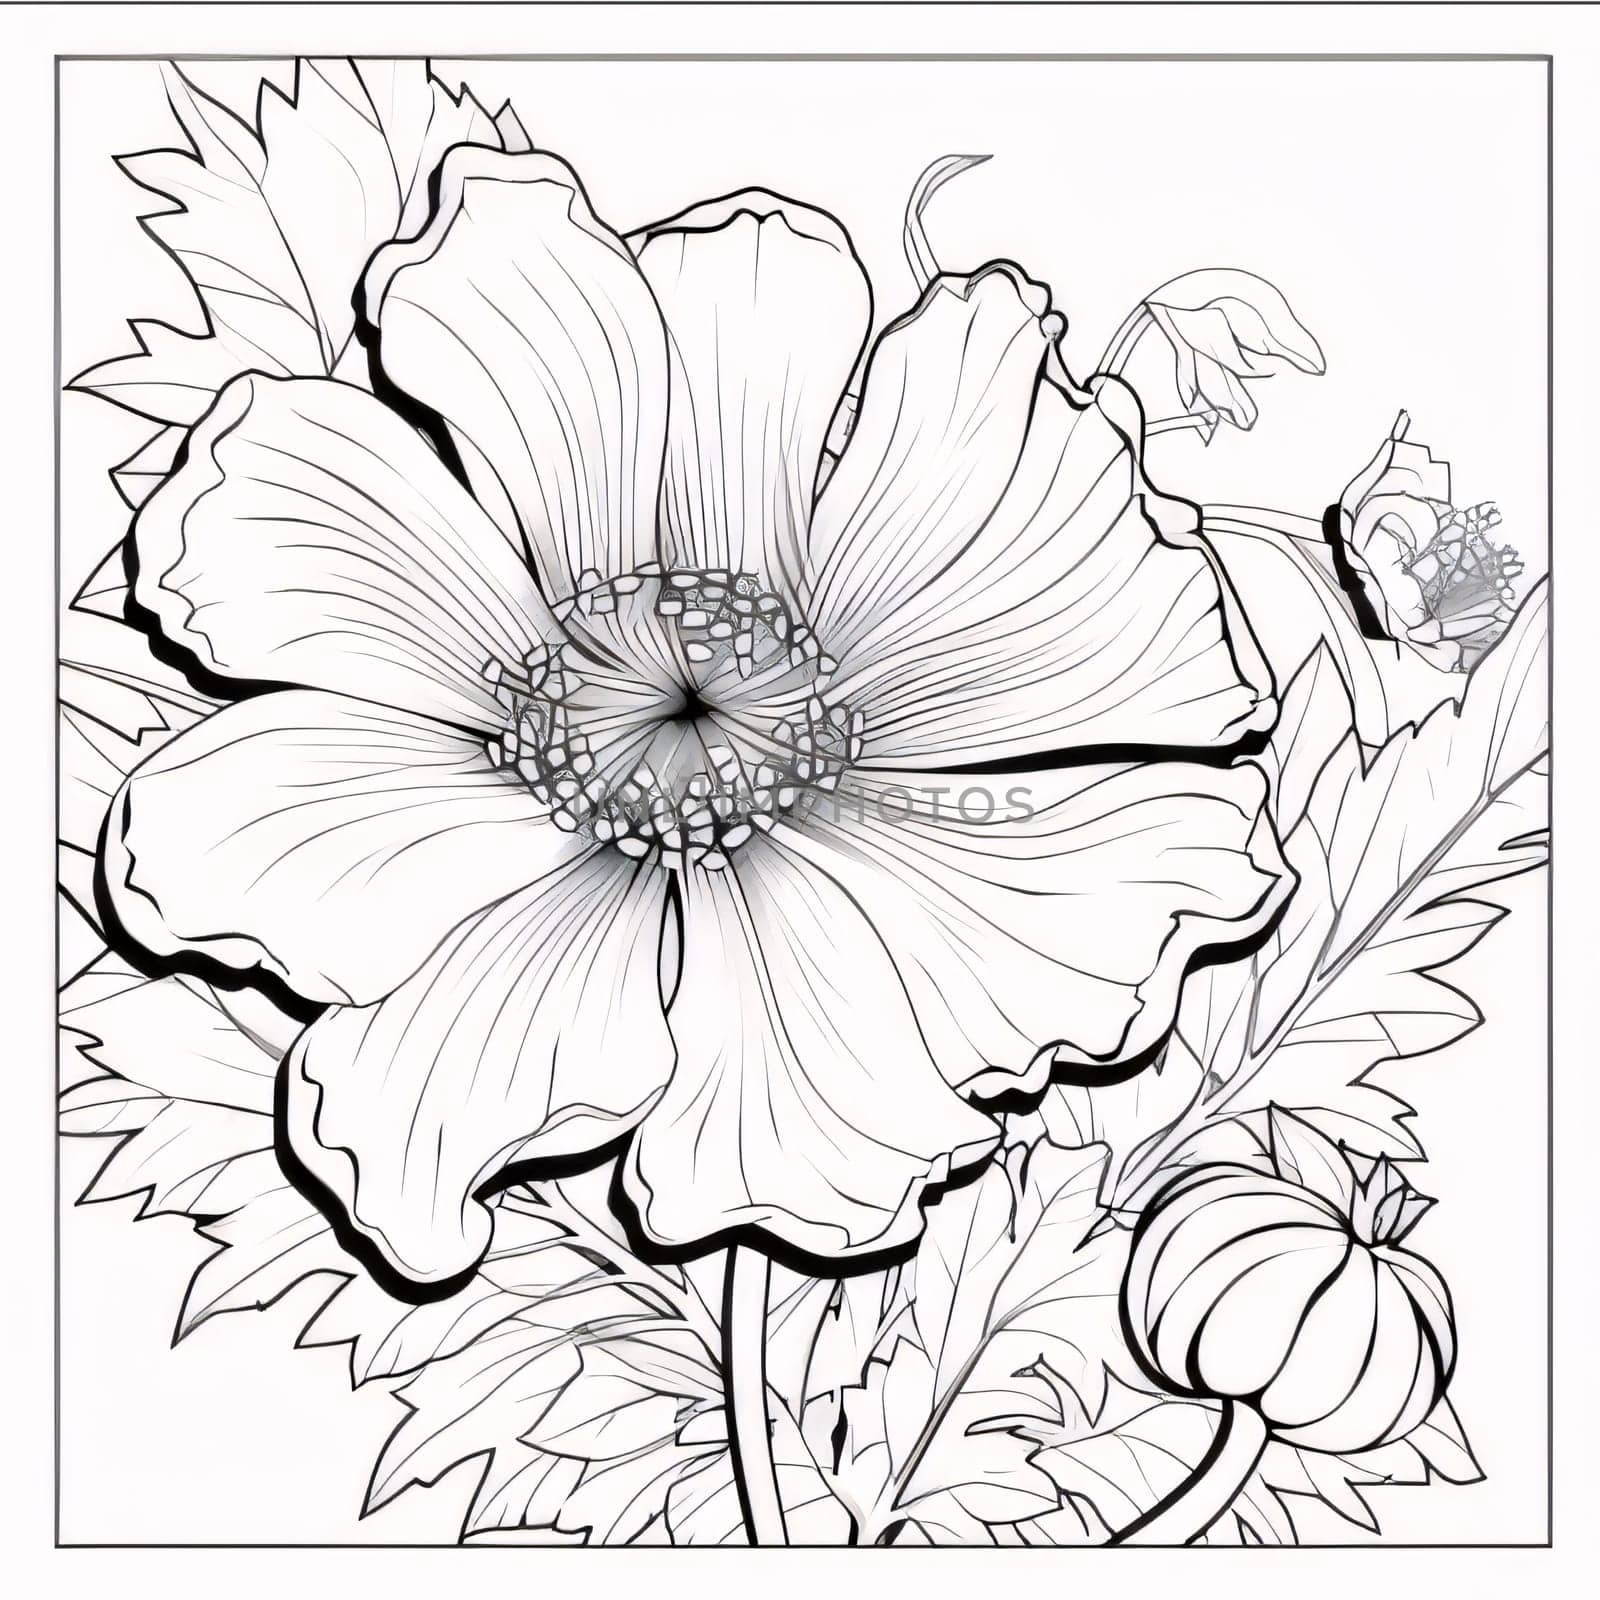 Black and white coloring sheet of a flower with leaves in a frame.Flowering flowers, a symbol of spring, new life. by ThemesS